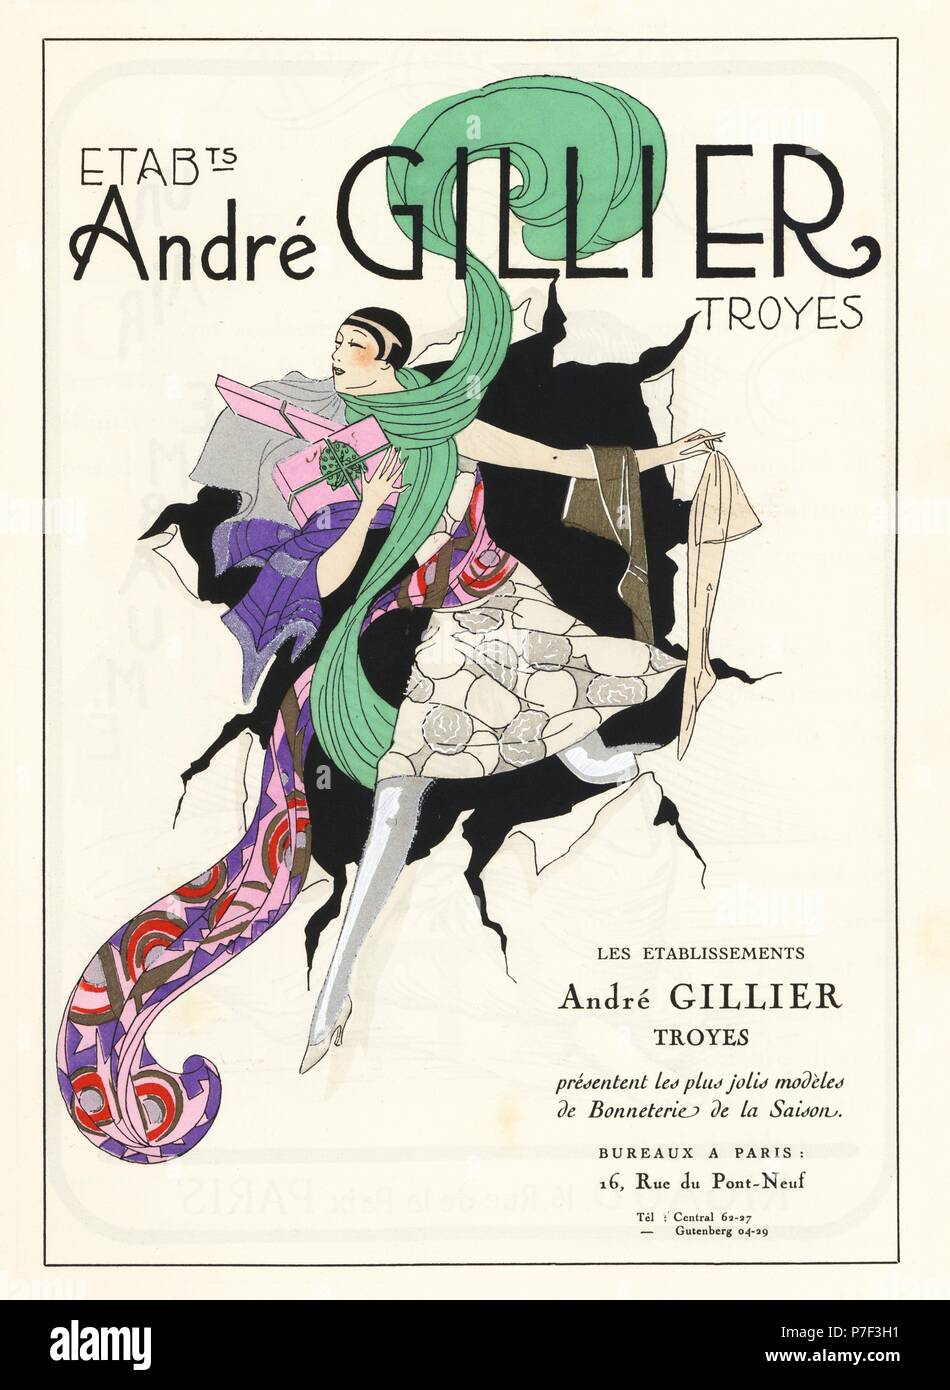 andré gillier